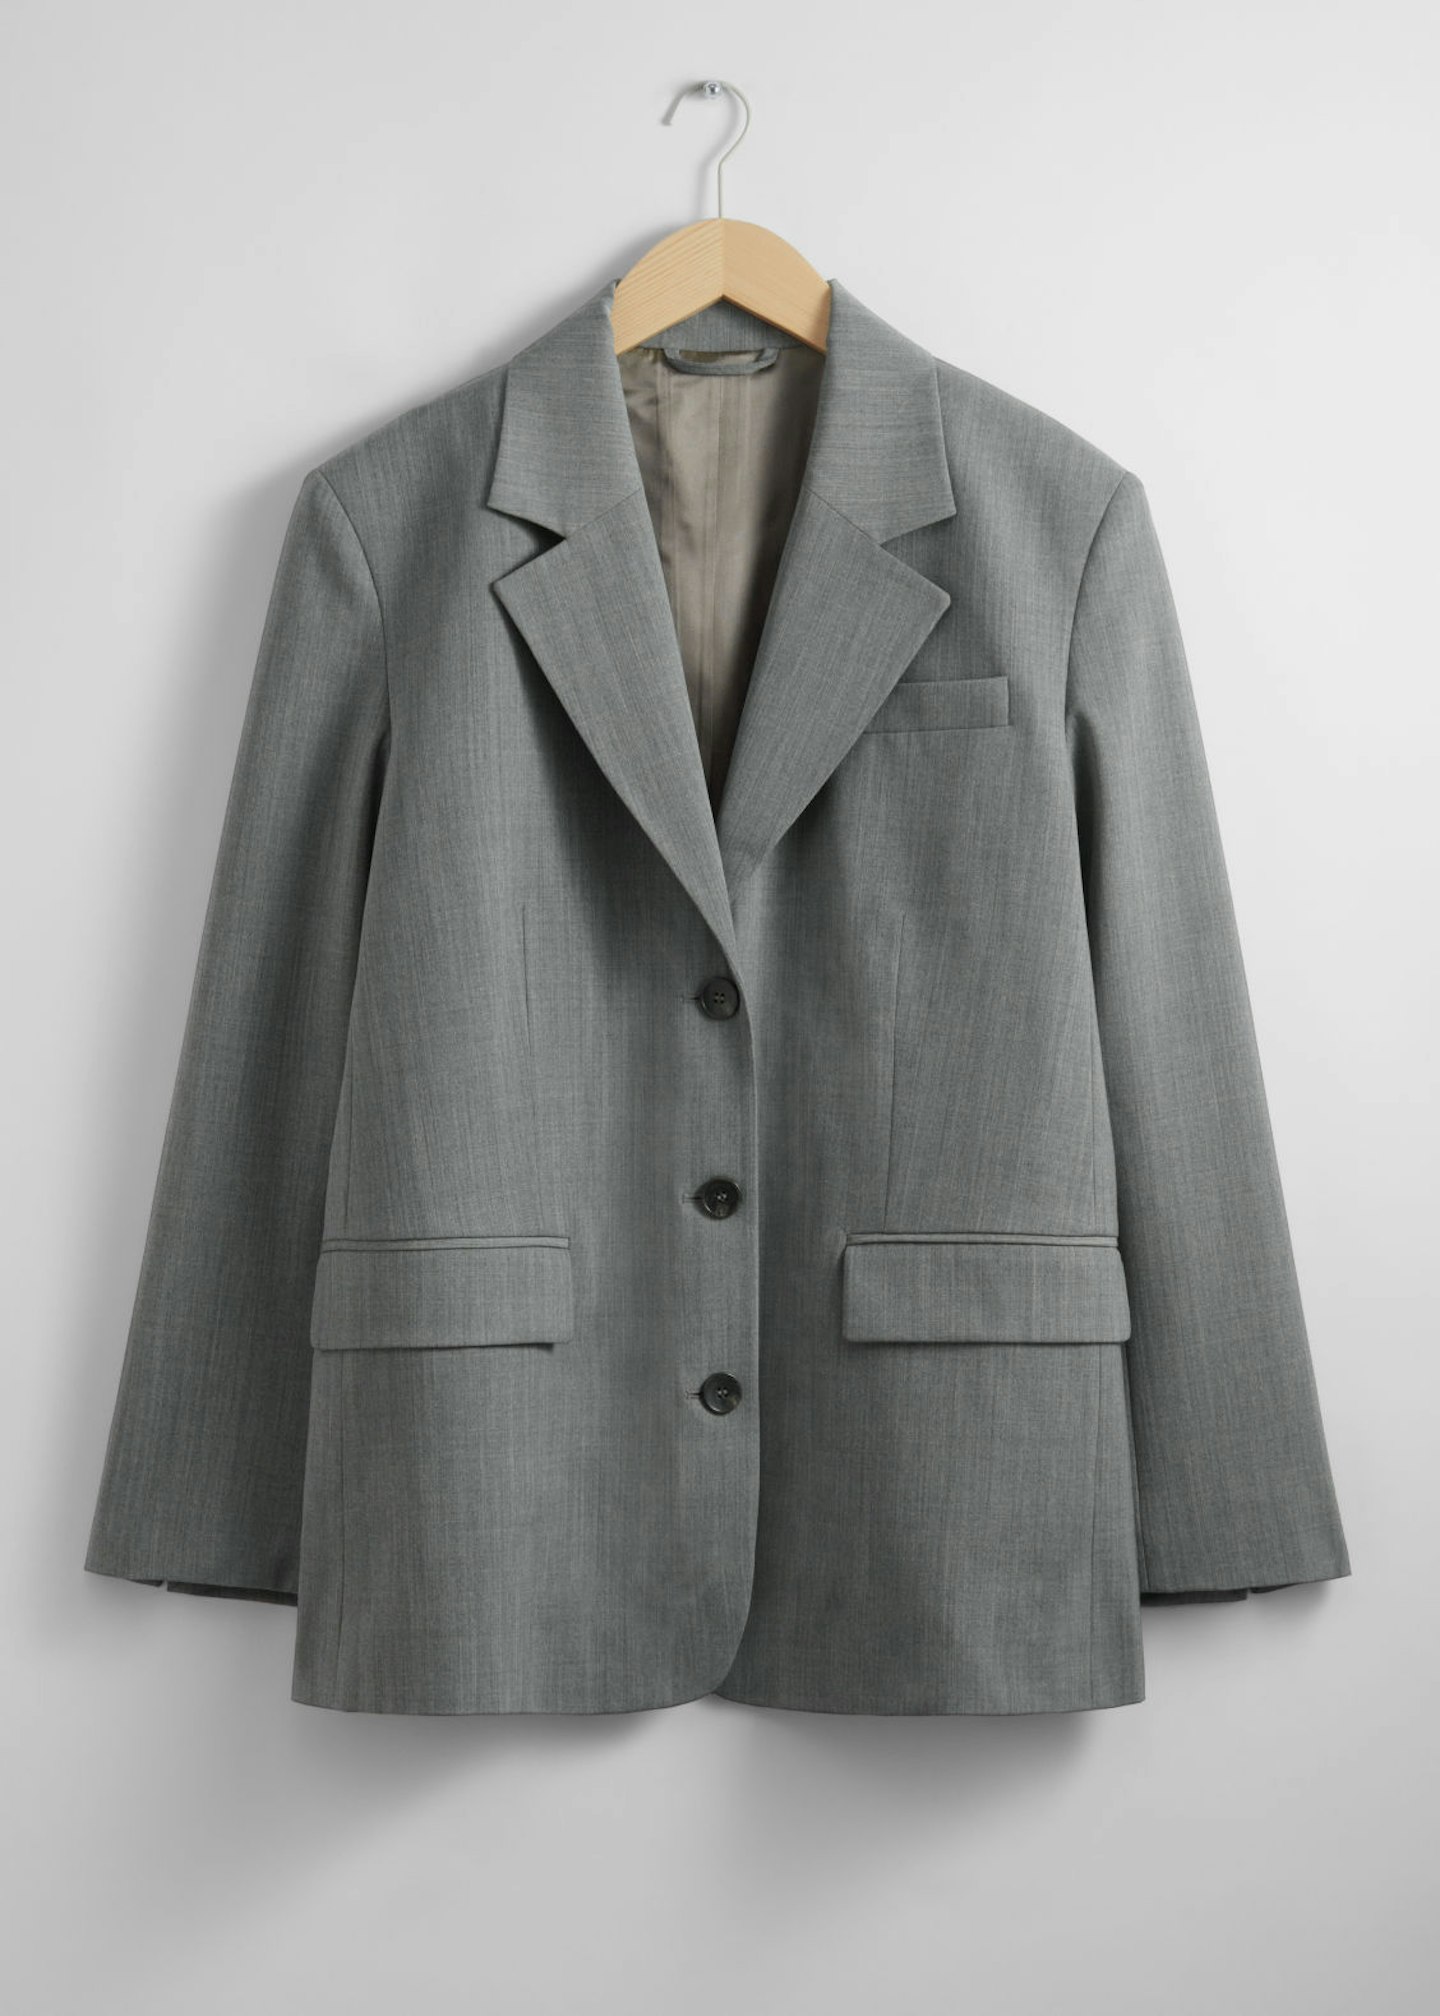 & Other Stories, Single-Breasted Blazer